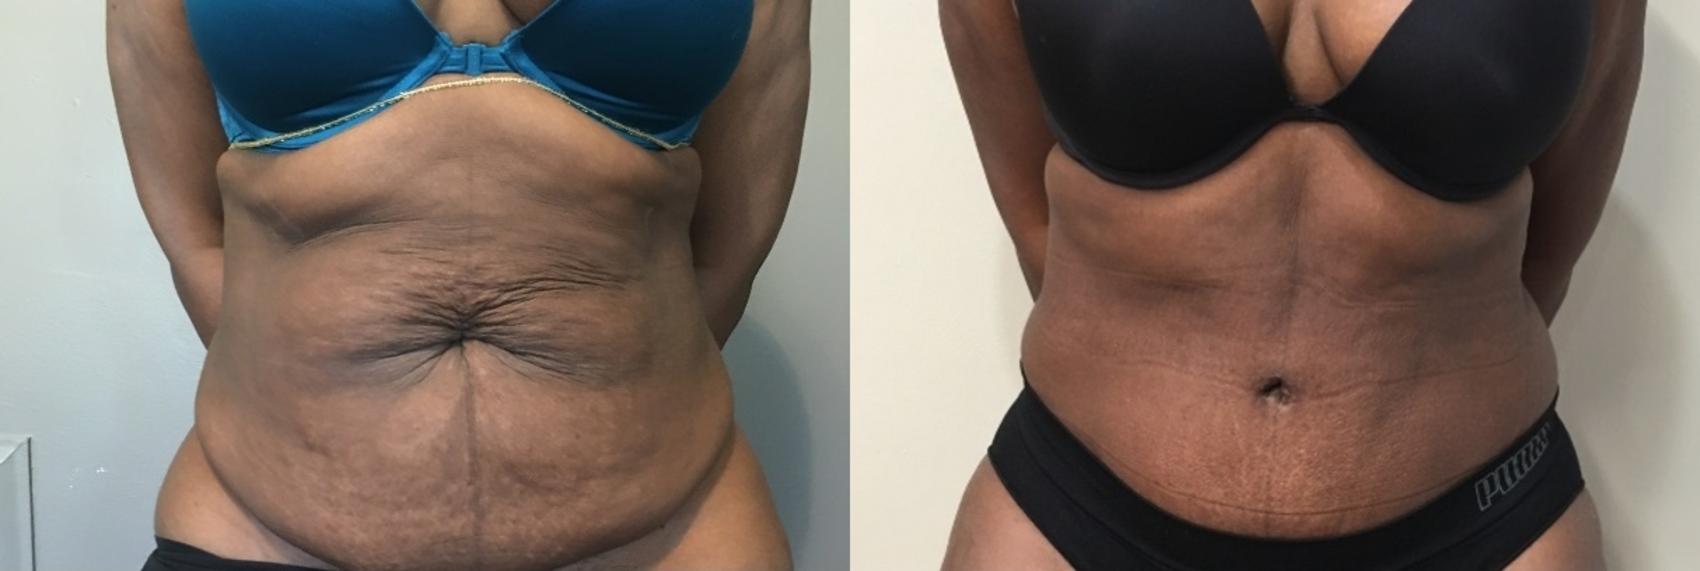 Mini Tuck And Tummy Tuck (abdominoplasty) Before & After Photos Patient 06